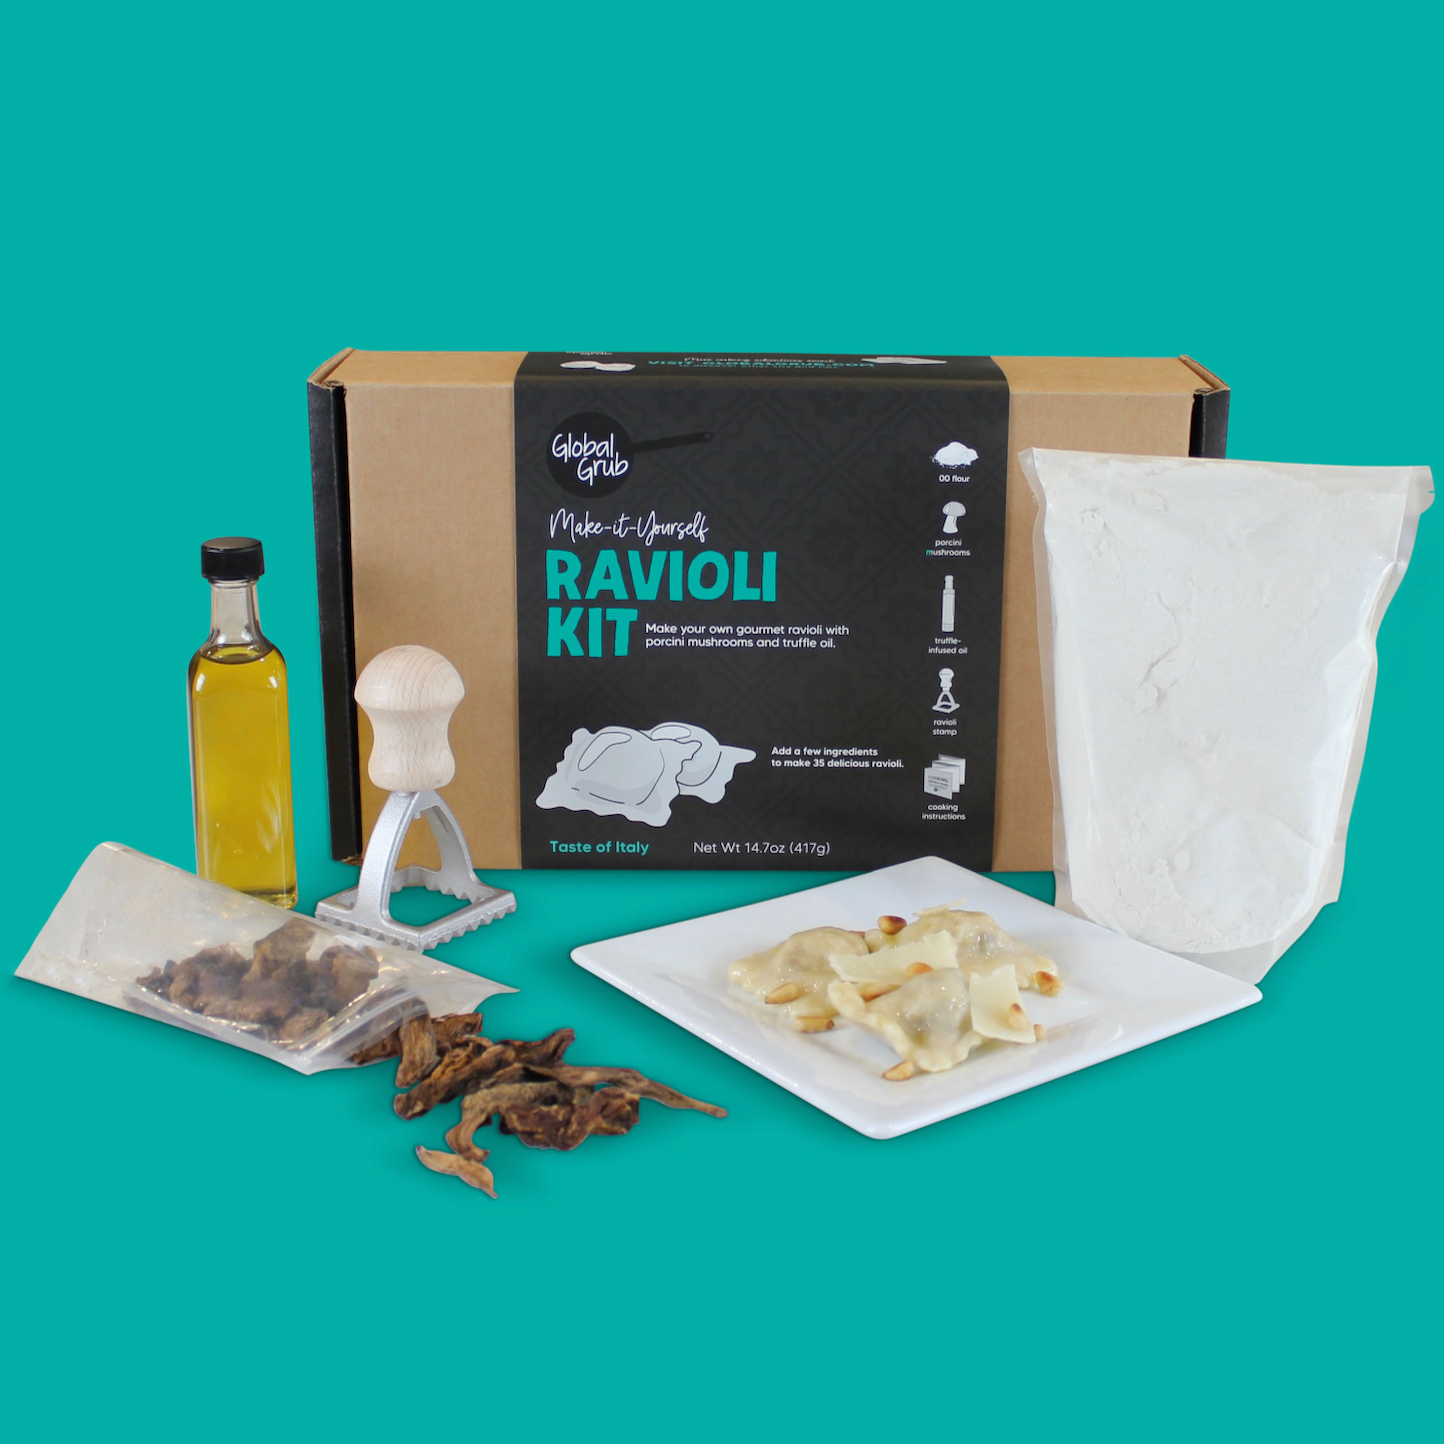 Unique DIY Food Kit Gifts, DIY Cooking Gifts